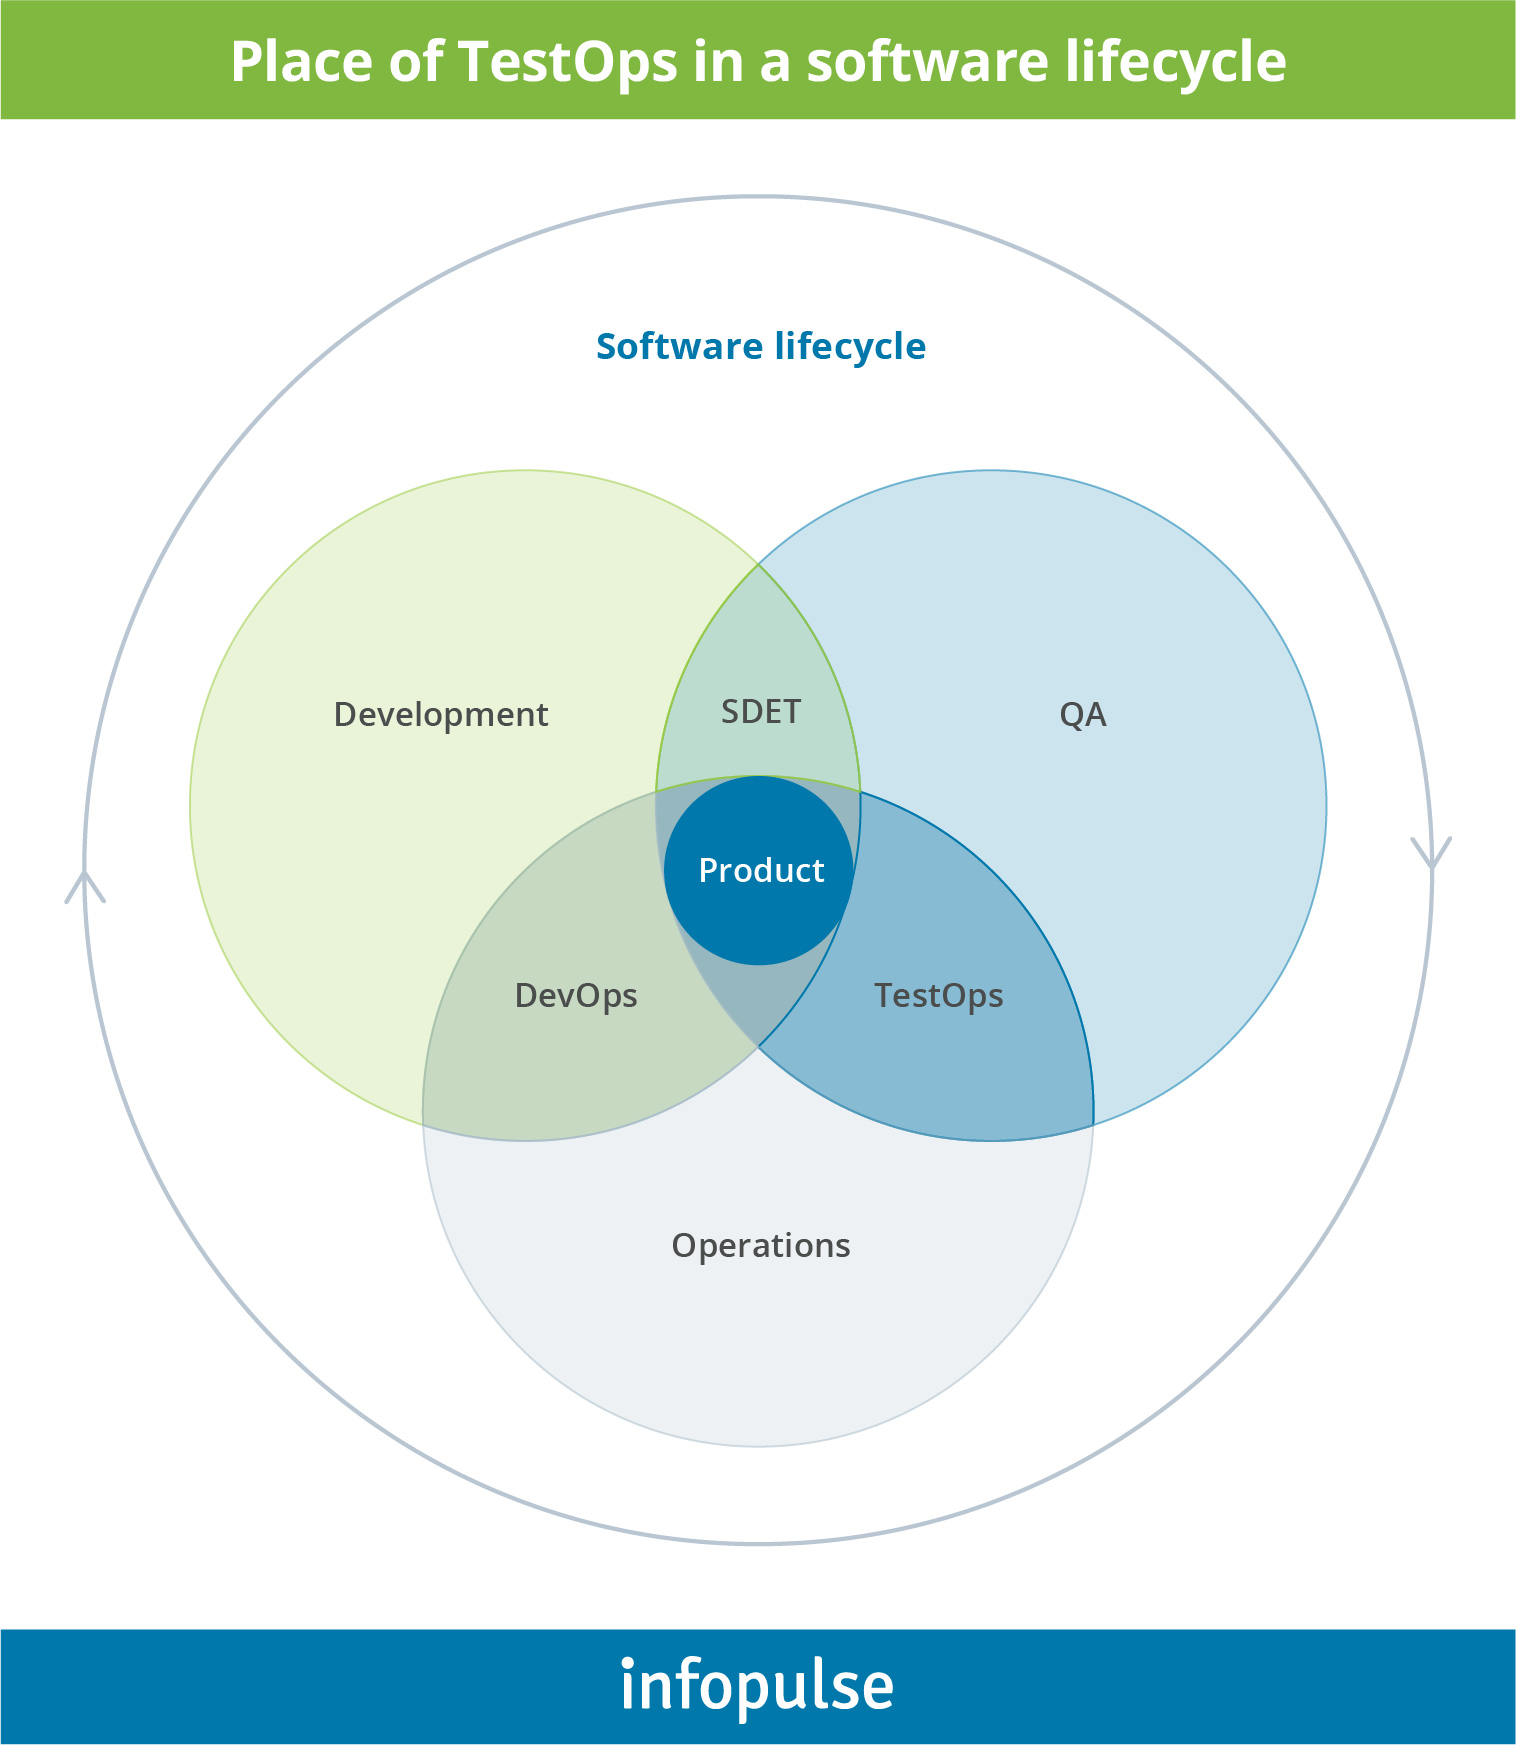 Place-of-testops-in-a-software-lifecycle - 2